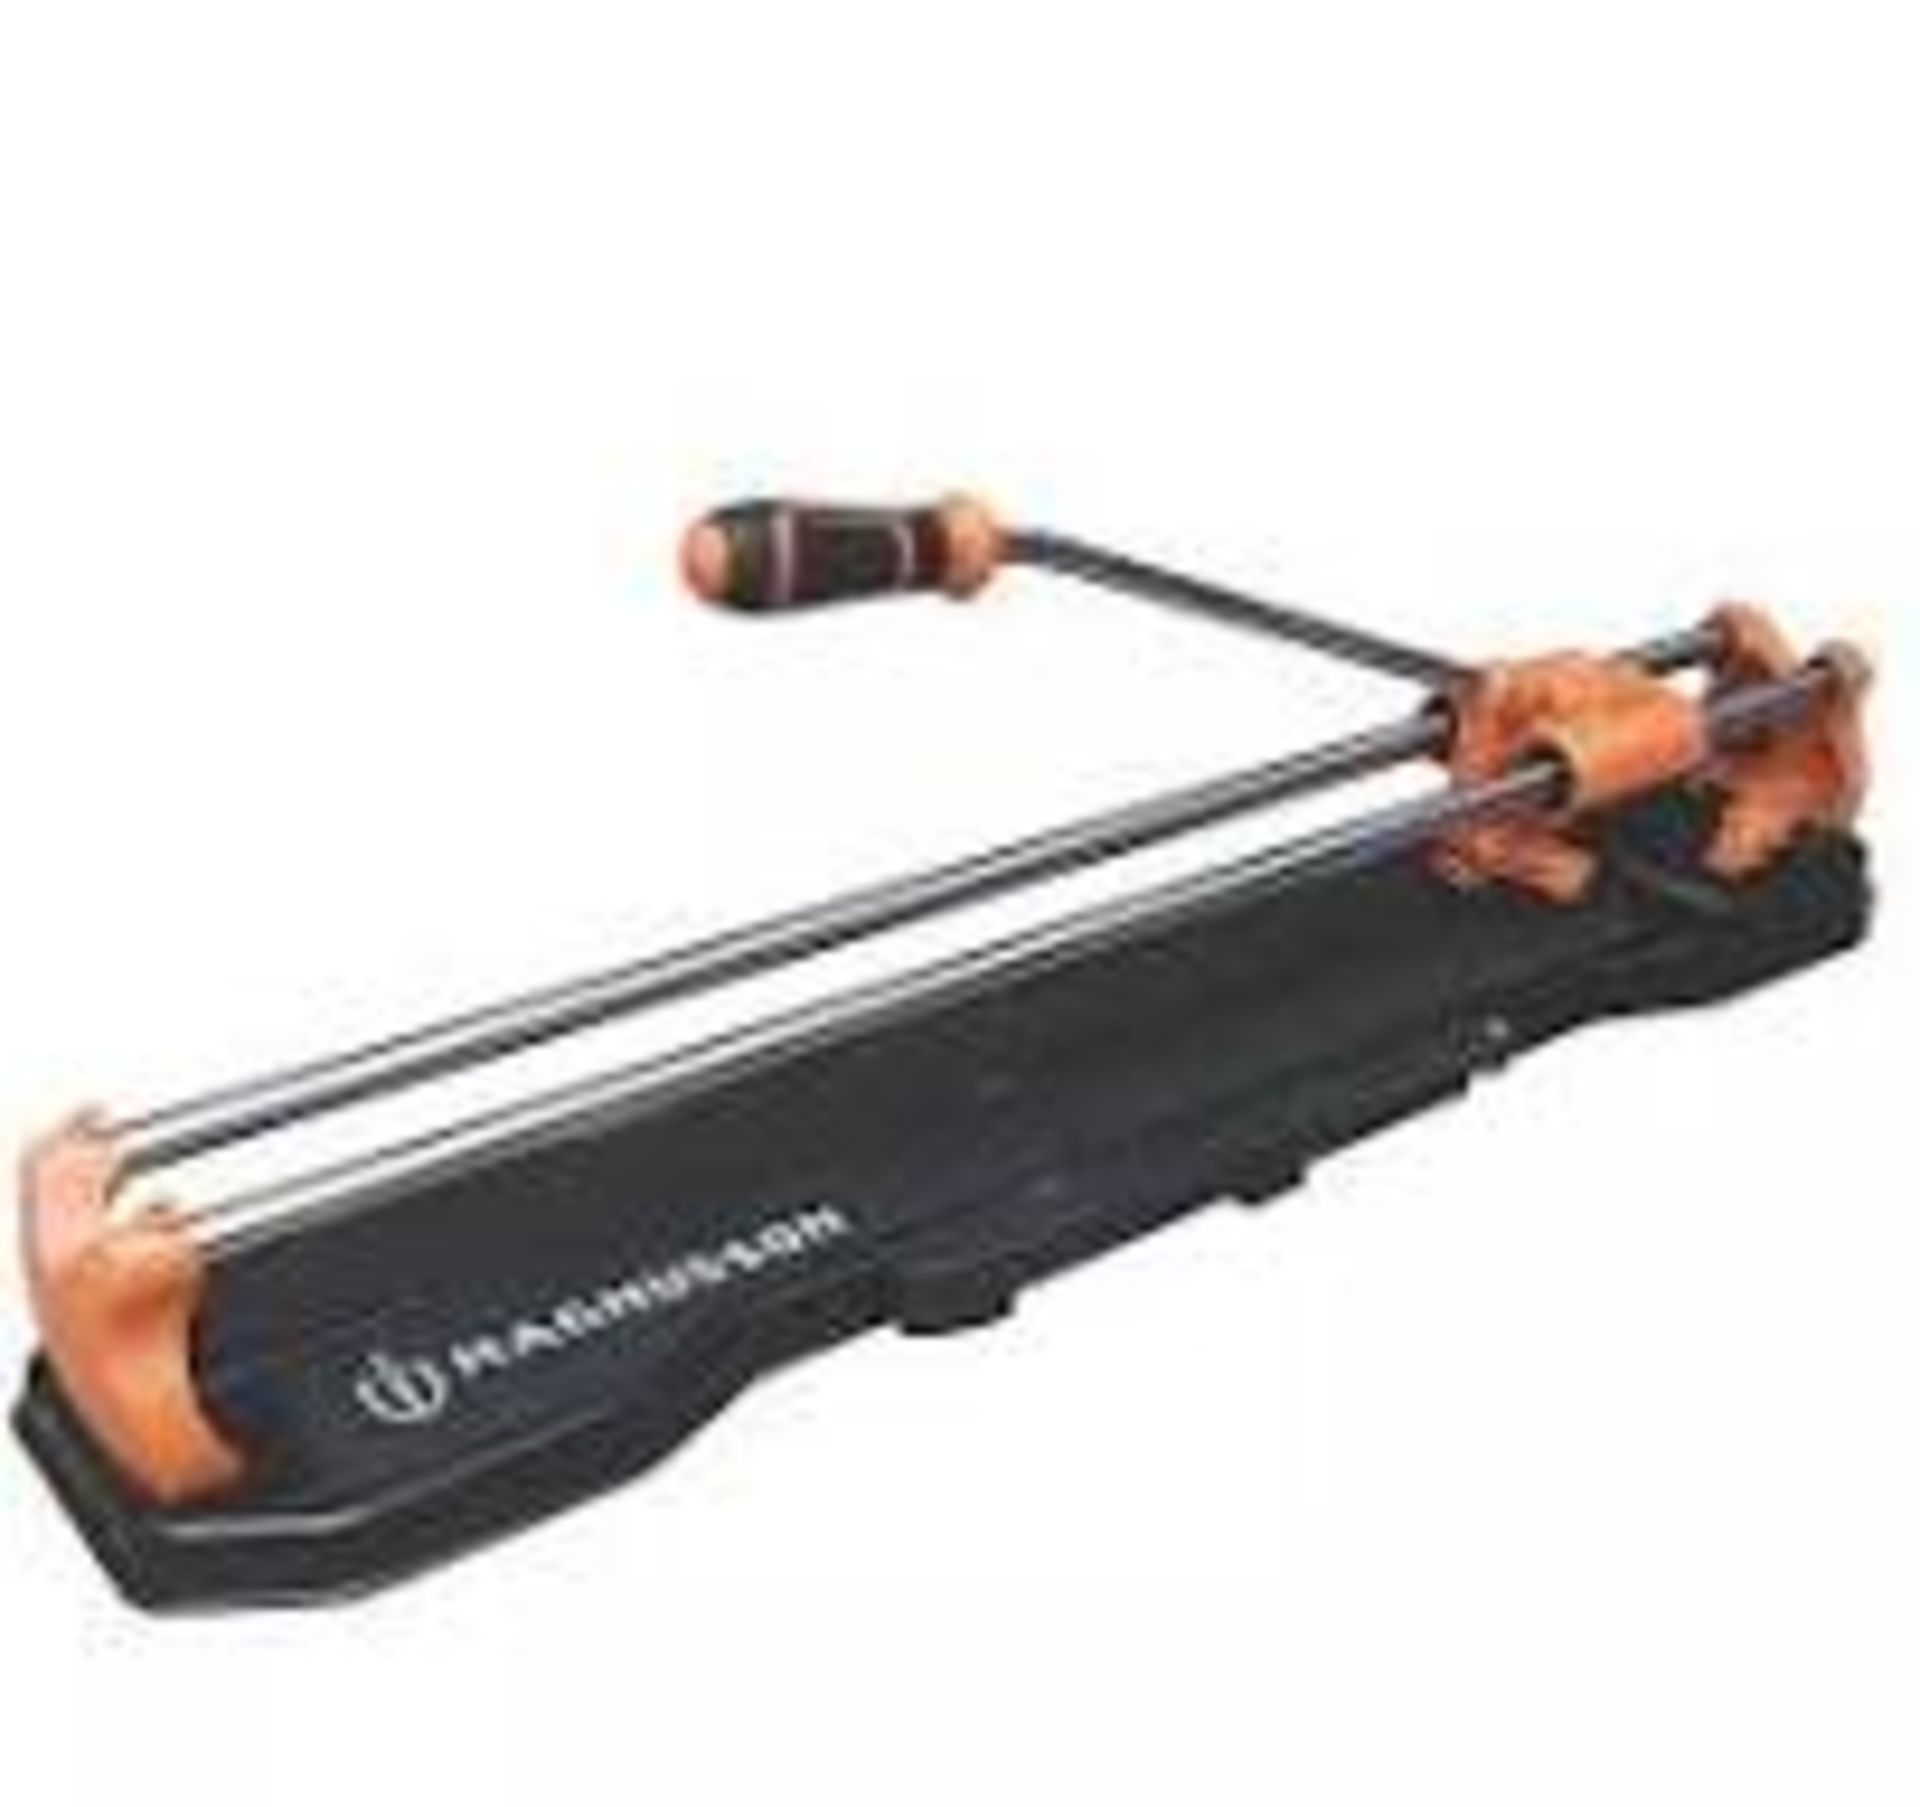 Magnusson Tile Cutter High Performance Heavy Duty Manual 630MM Bevel Angle 45 ° -ER 41